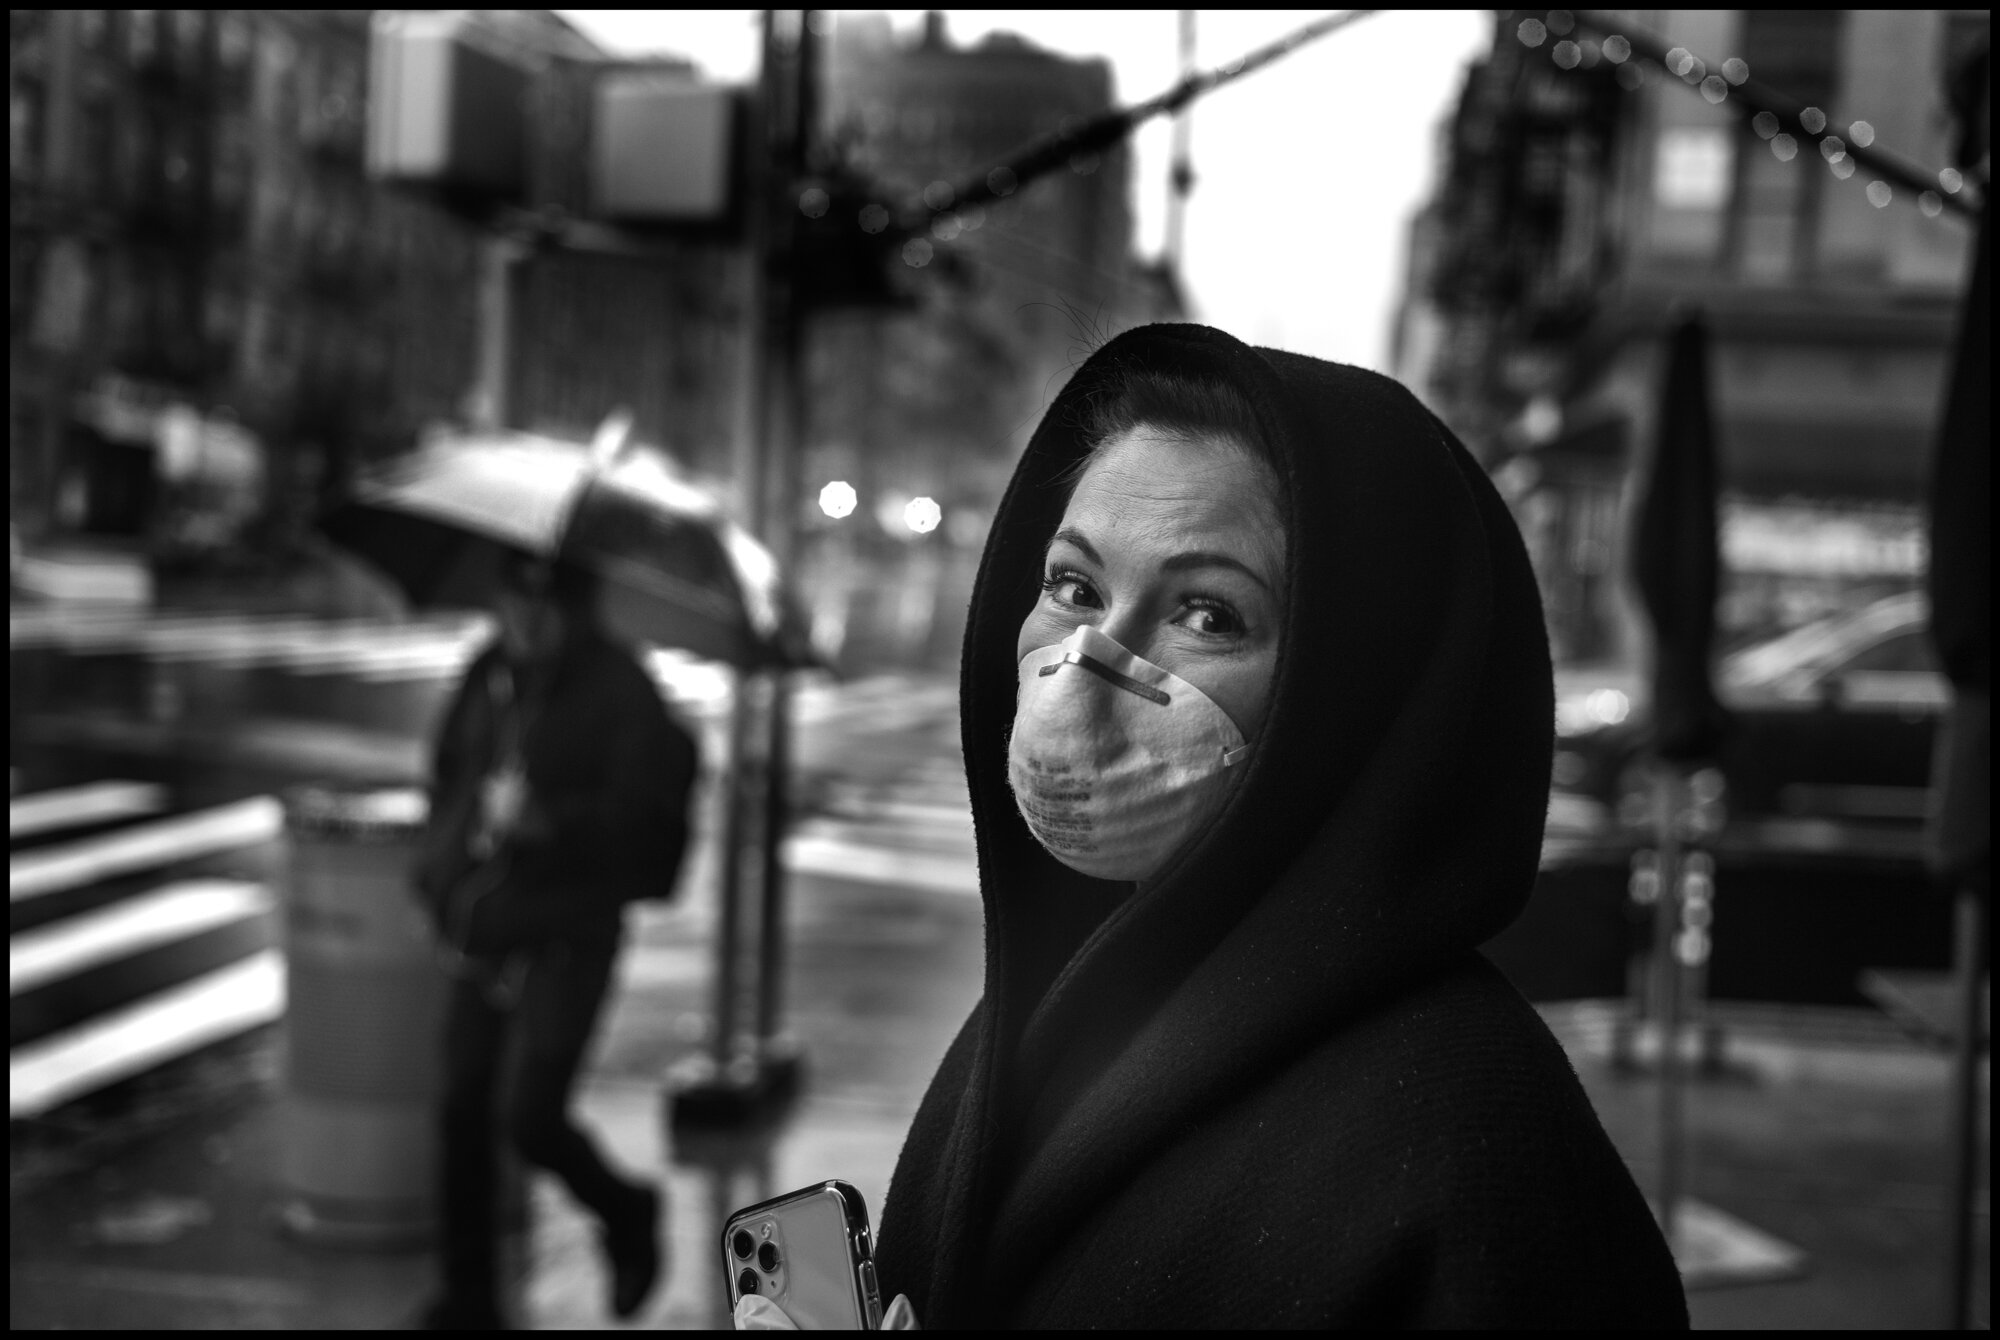  Natalia, originally from Odessa, in the Ukraine, stands on the sidewalk in the rain at 83rd and Columbus.   March 23, 2020. © Peter Turnley.  ID# 02-002 